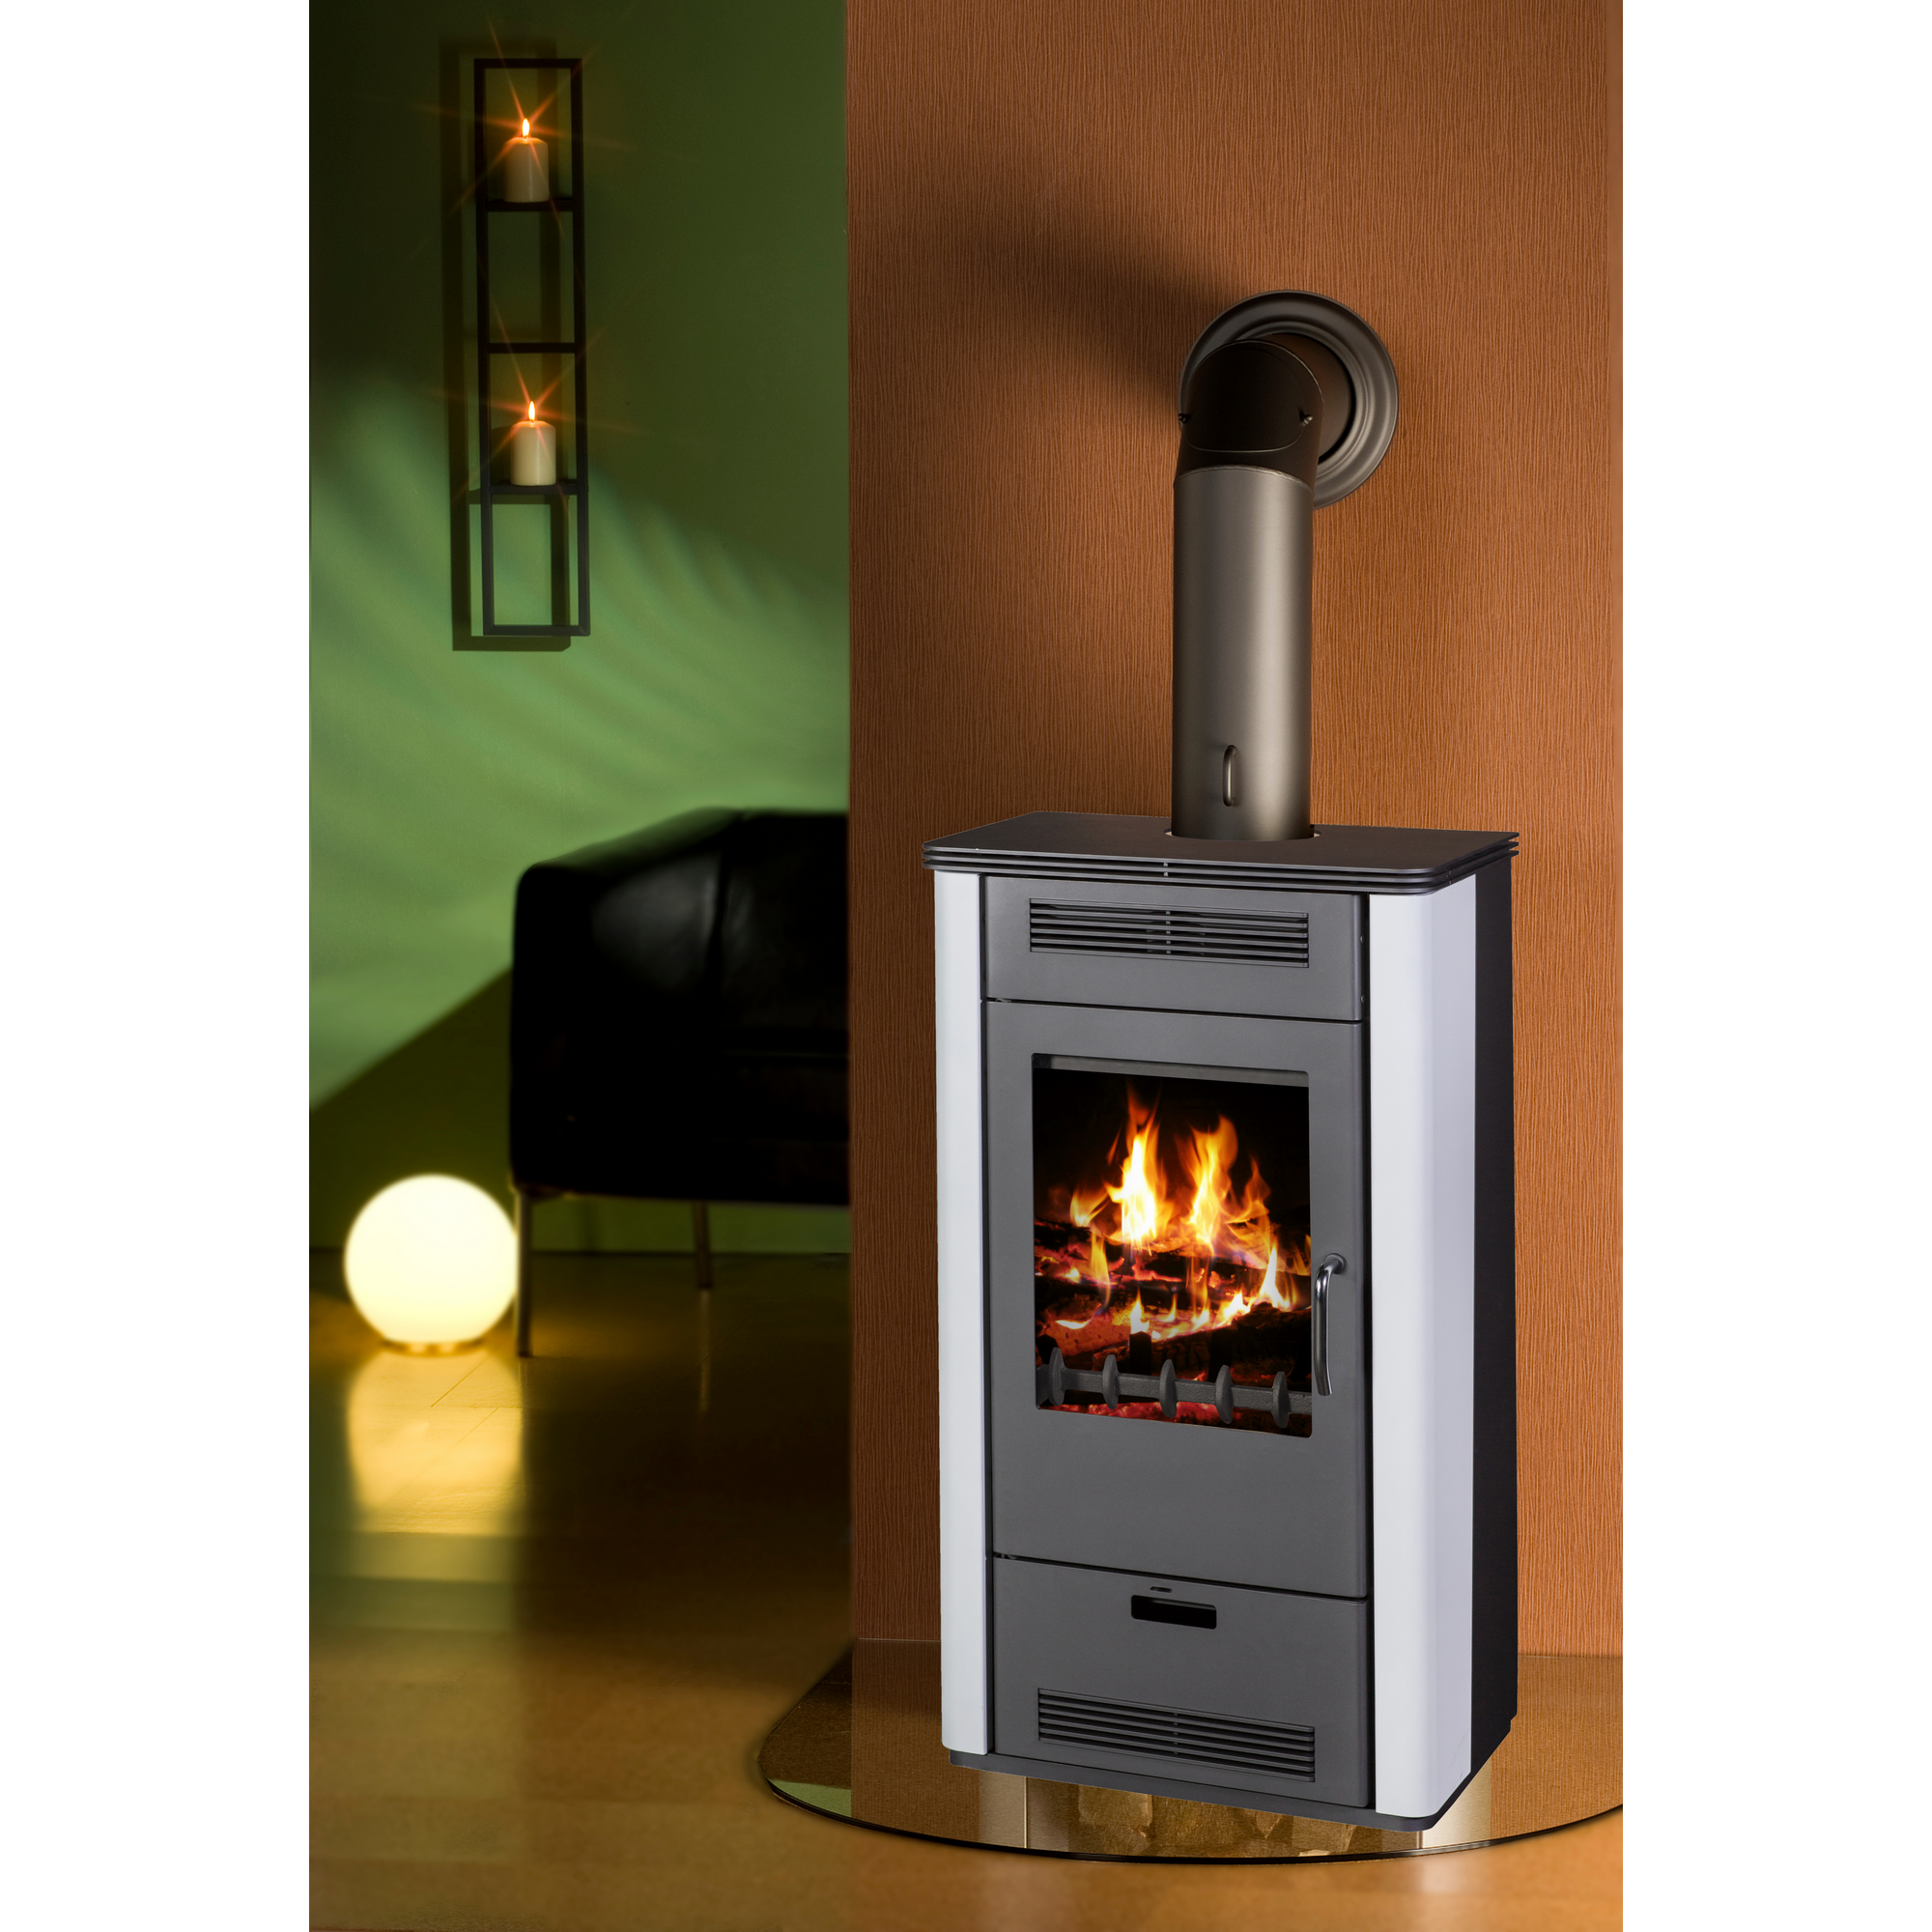 Kaminofen 'Etna' Stahl 7 kW + product picture